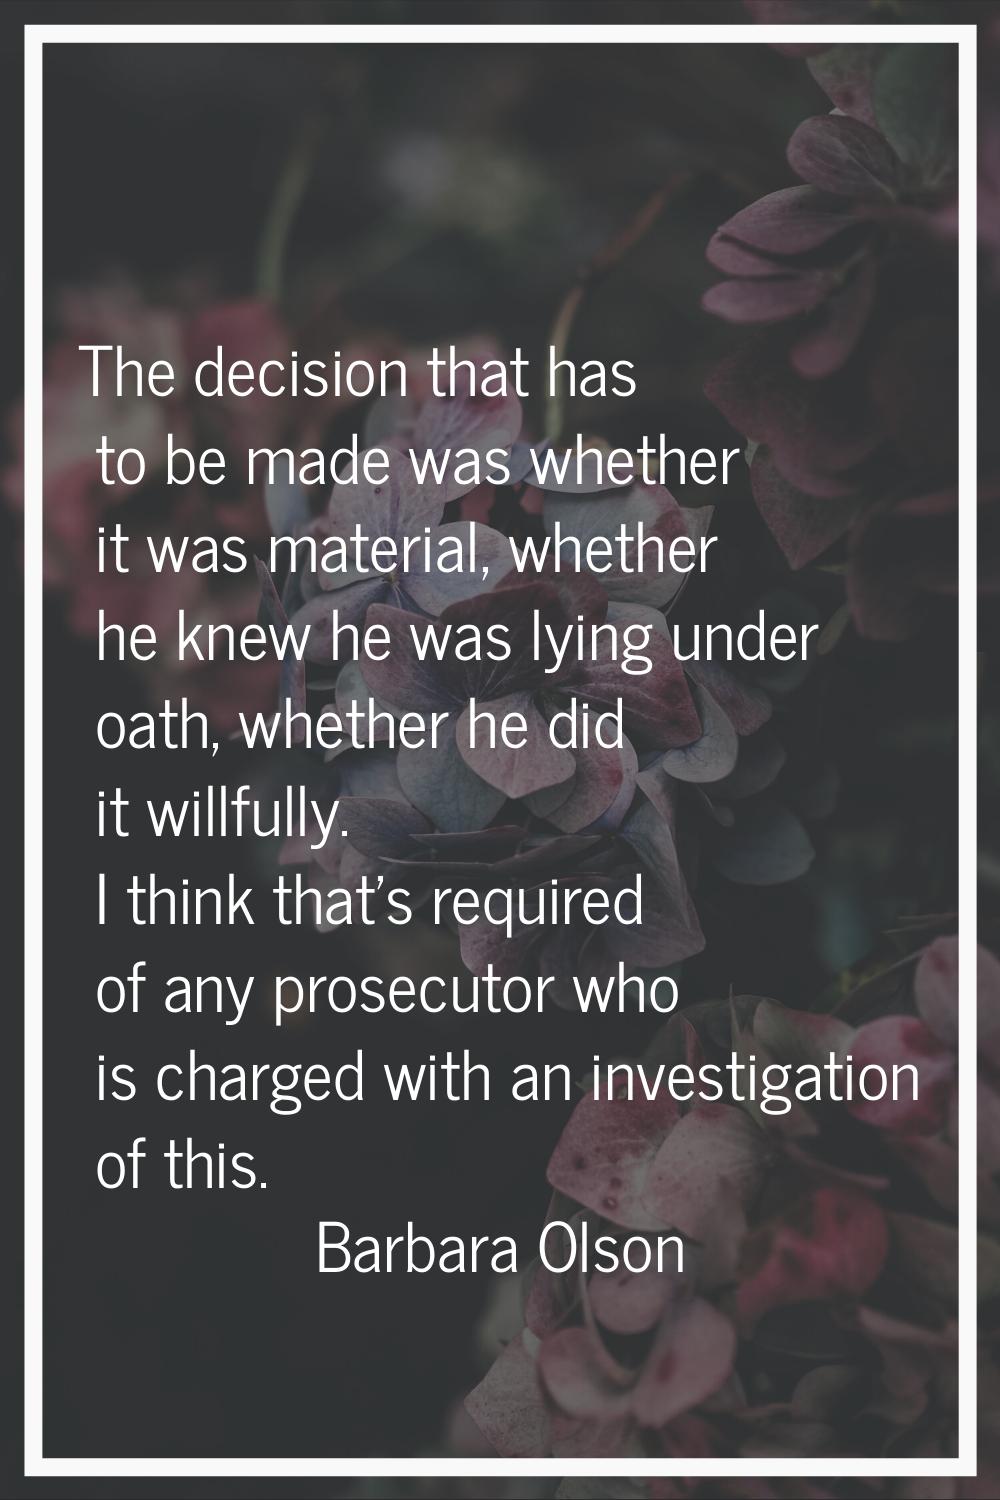 The decision that has to be made was whether it was material, whether he knew he was lying under oa